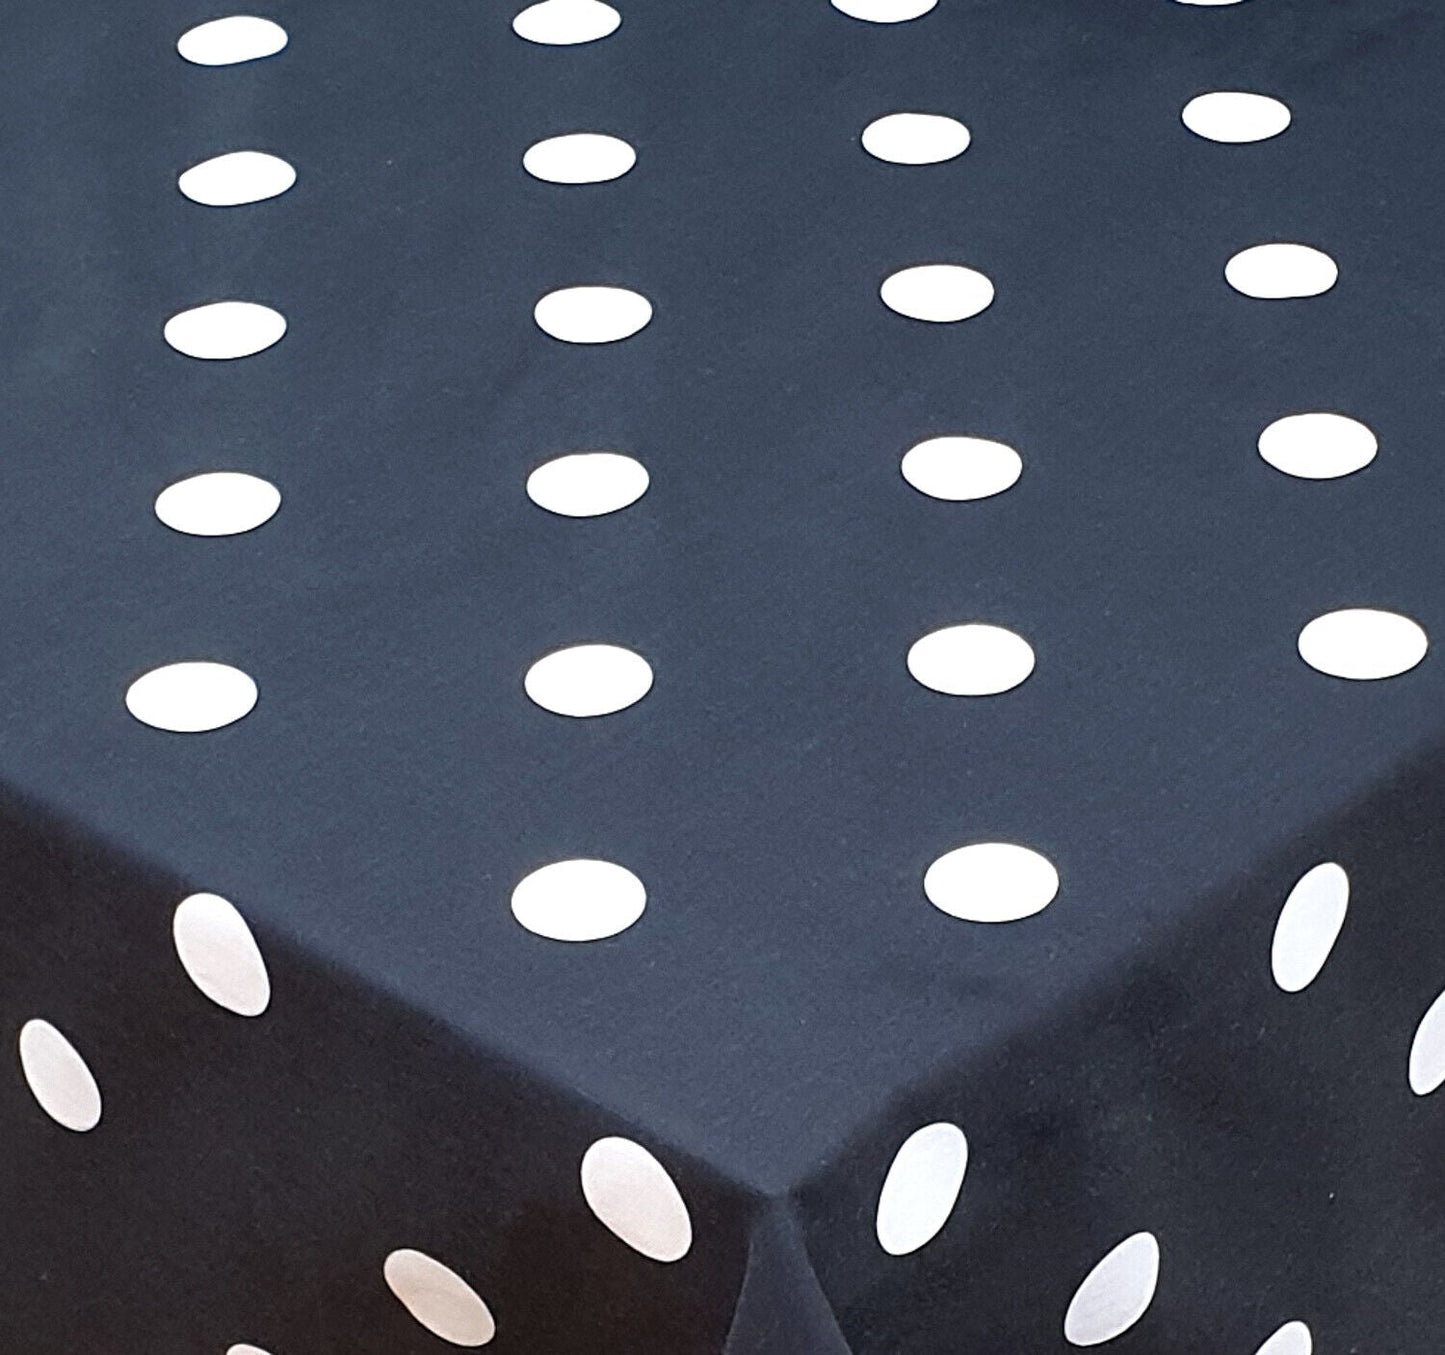 King Size Fitted Sheet Polkadot Black White Cirlces Spotted